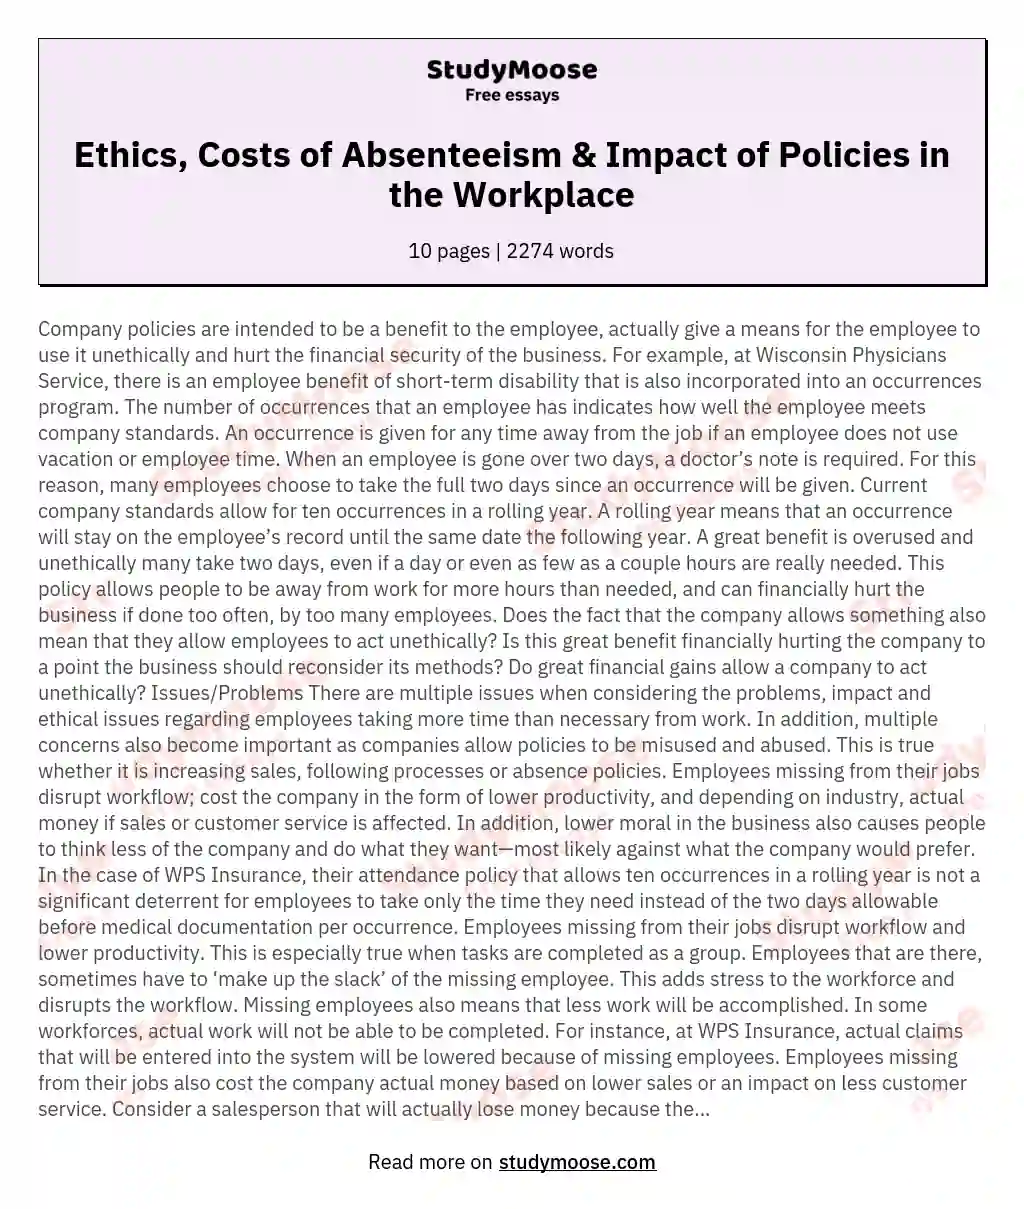 Ethics, Costs of Absenteeism &amp; Impact of Policies in the Workplace essay